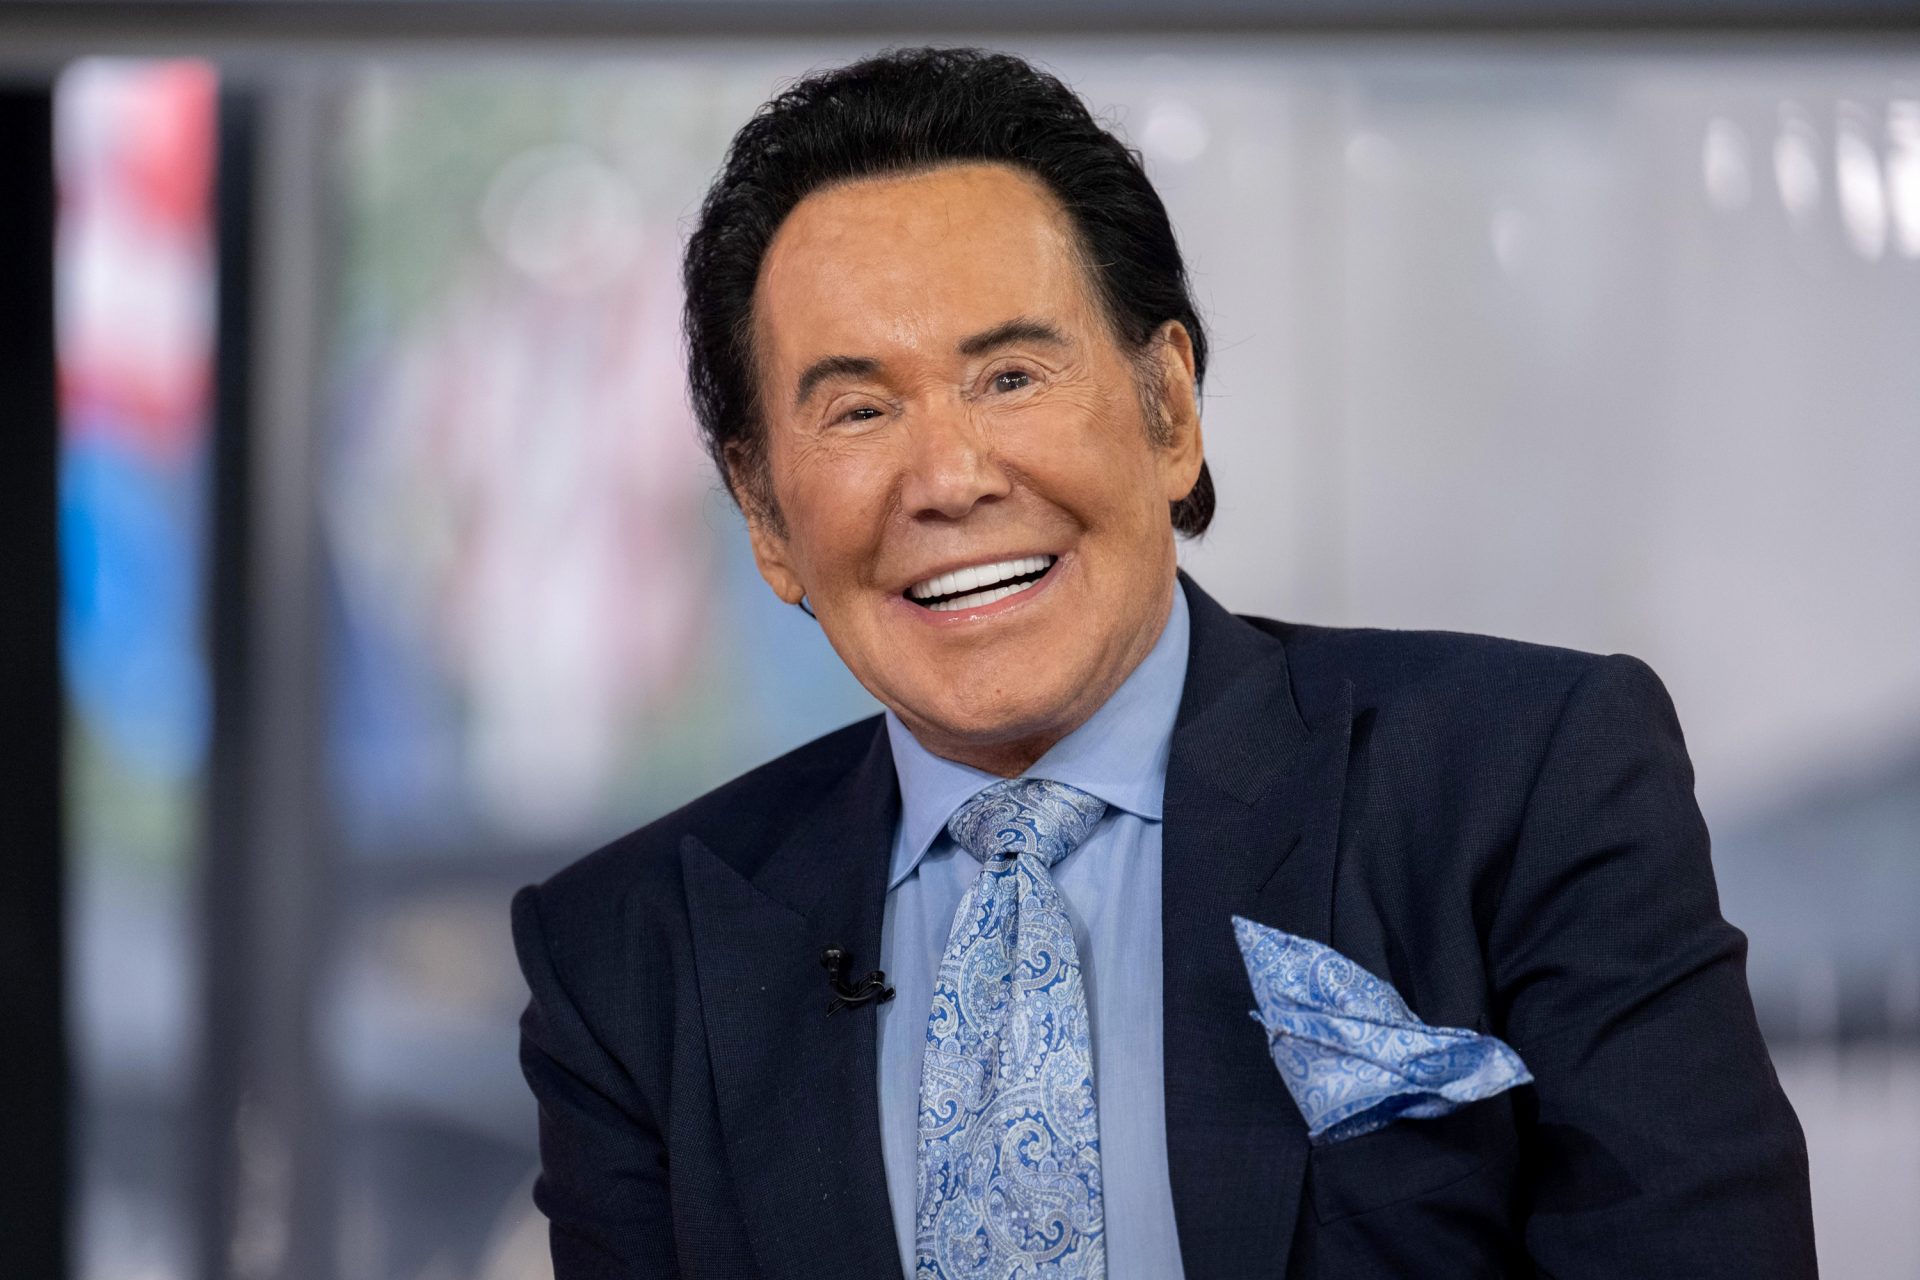 What's Wayne Newton been up to since losing all his money?